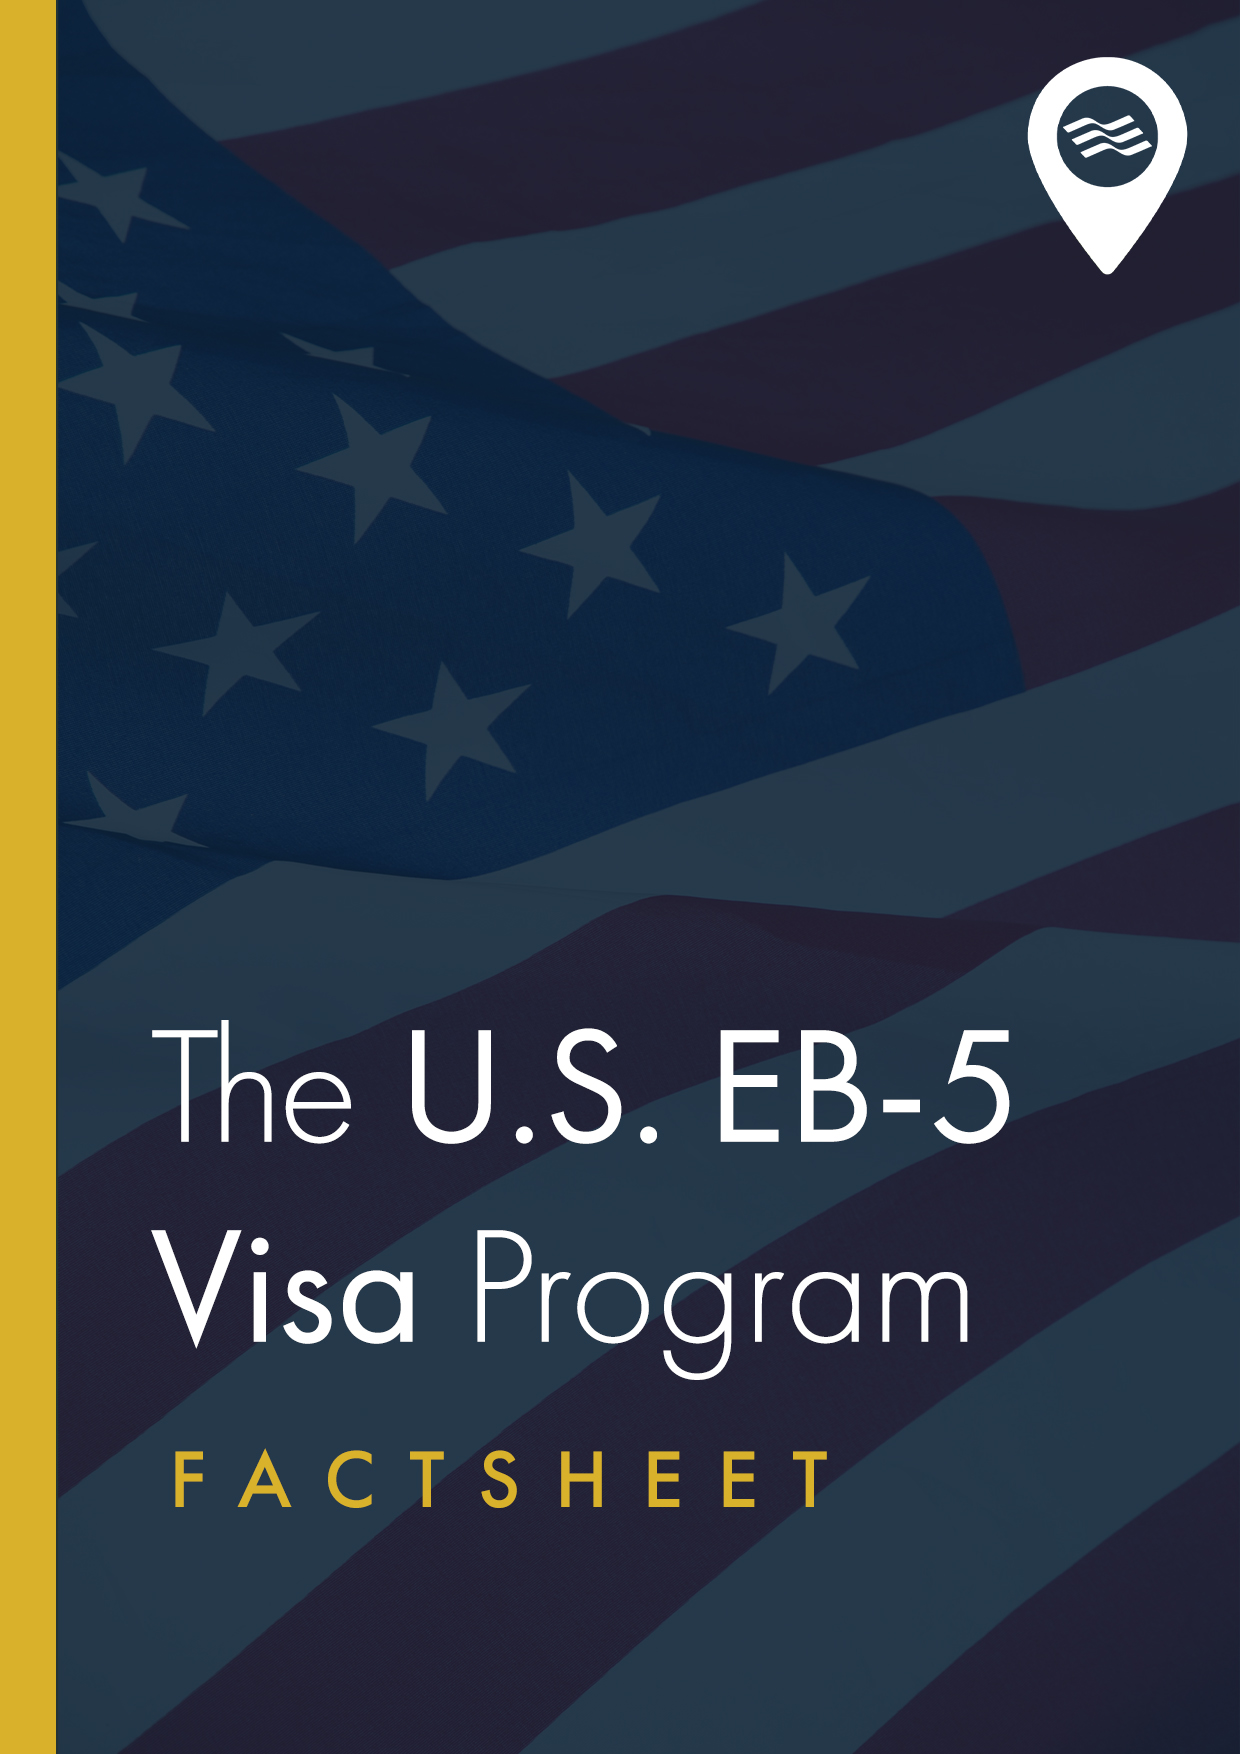 The EB-5 Immigrant Investor Programme Guide Download